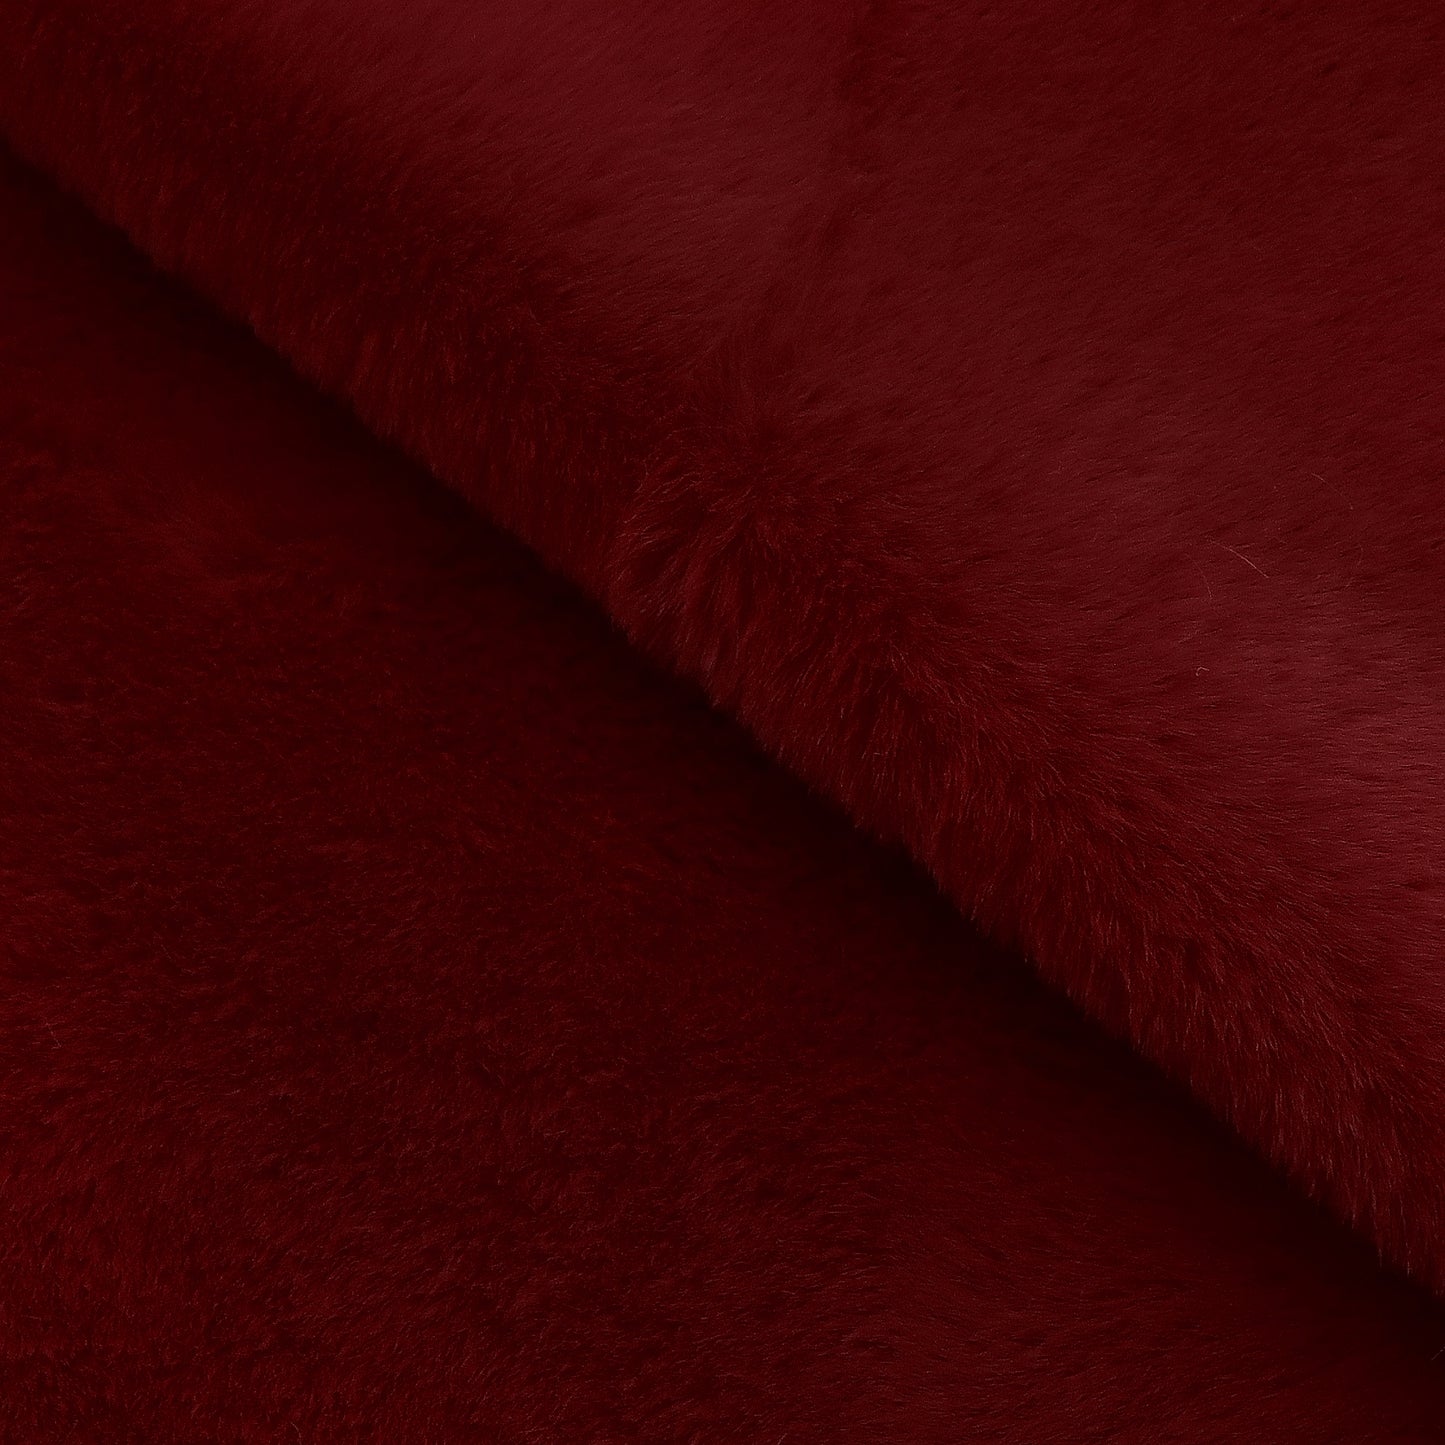 Wine Red Series Faux Leather Sheets Wholesale